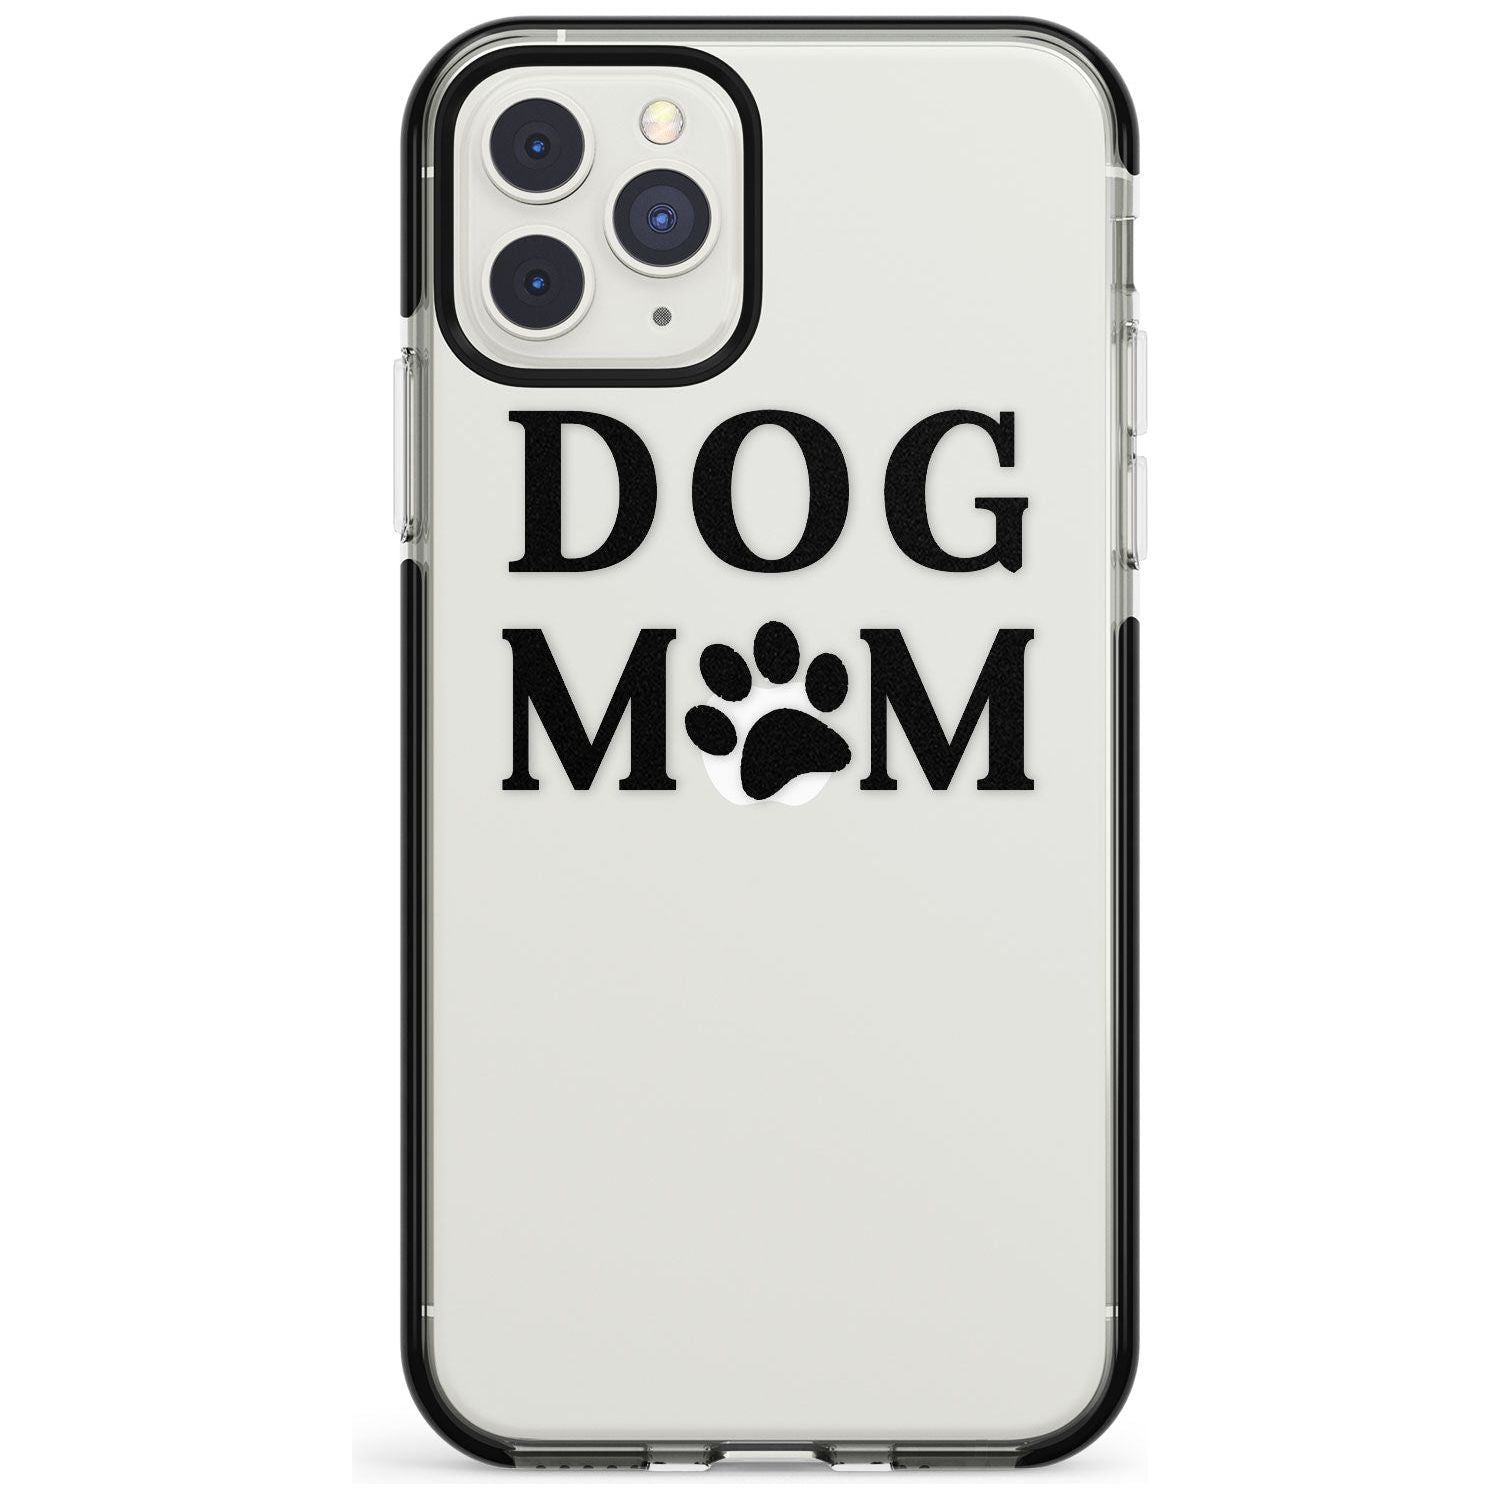 Dog Mom Paw Print Black Impact Phone Case for iPhone 11 Pro Max